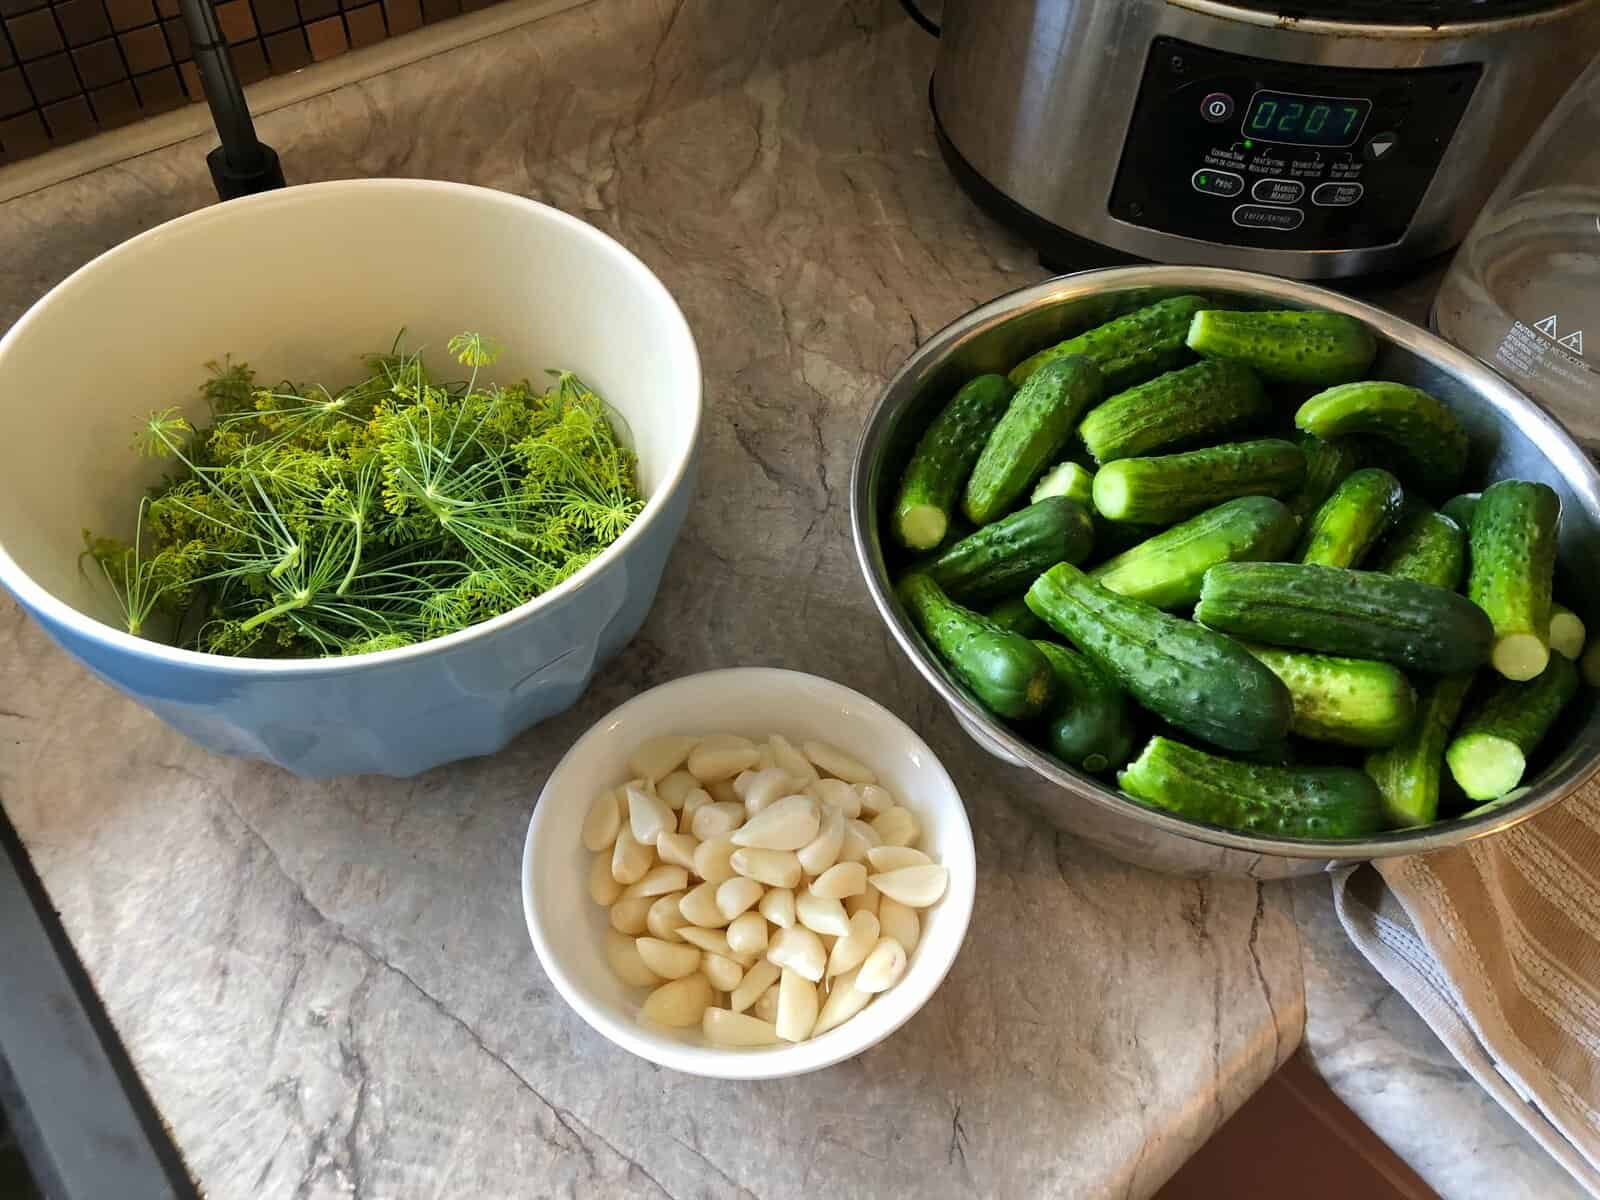 dill, garlic, and cucumbers in bowls